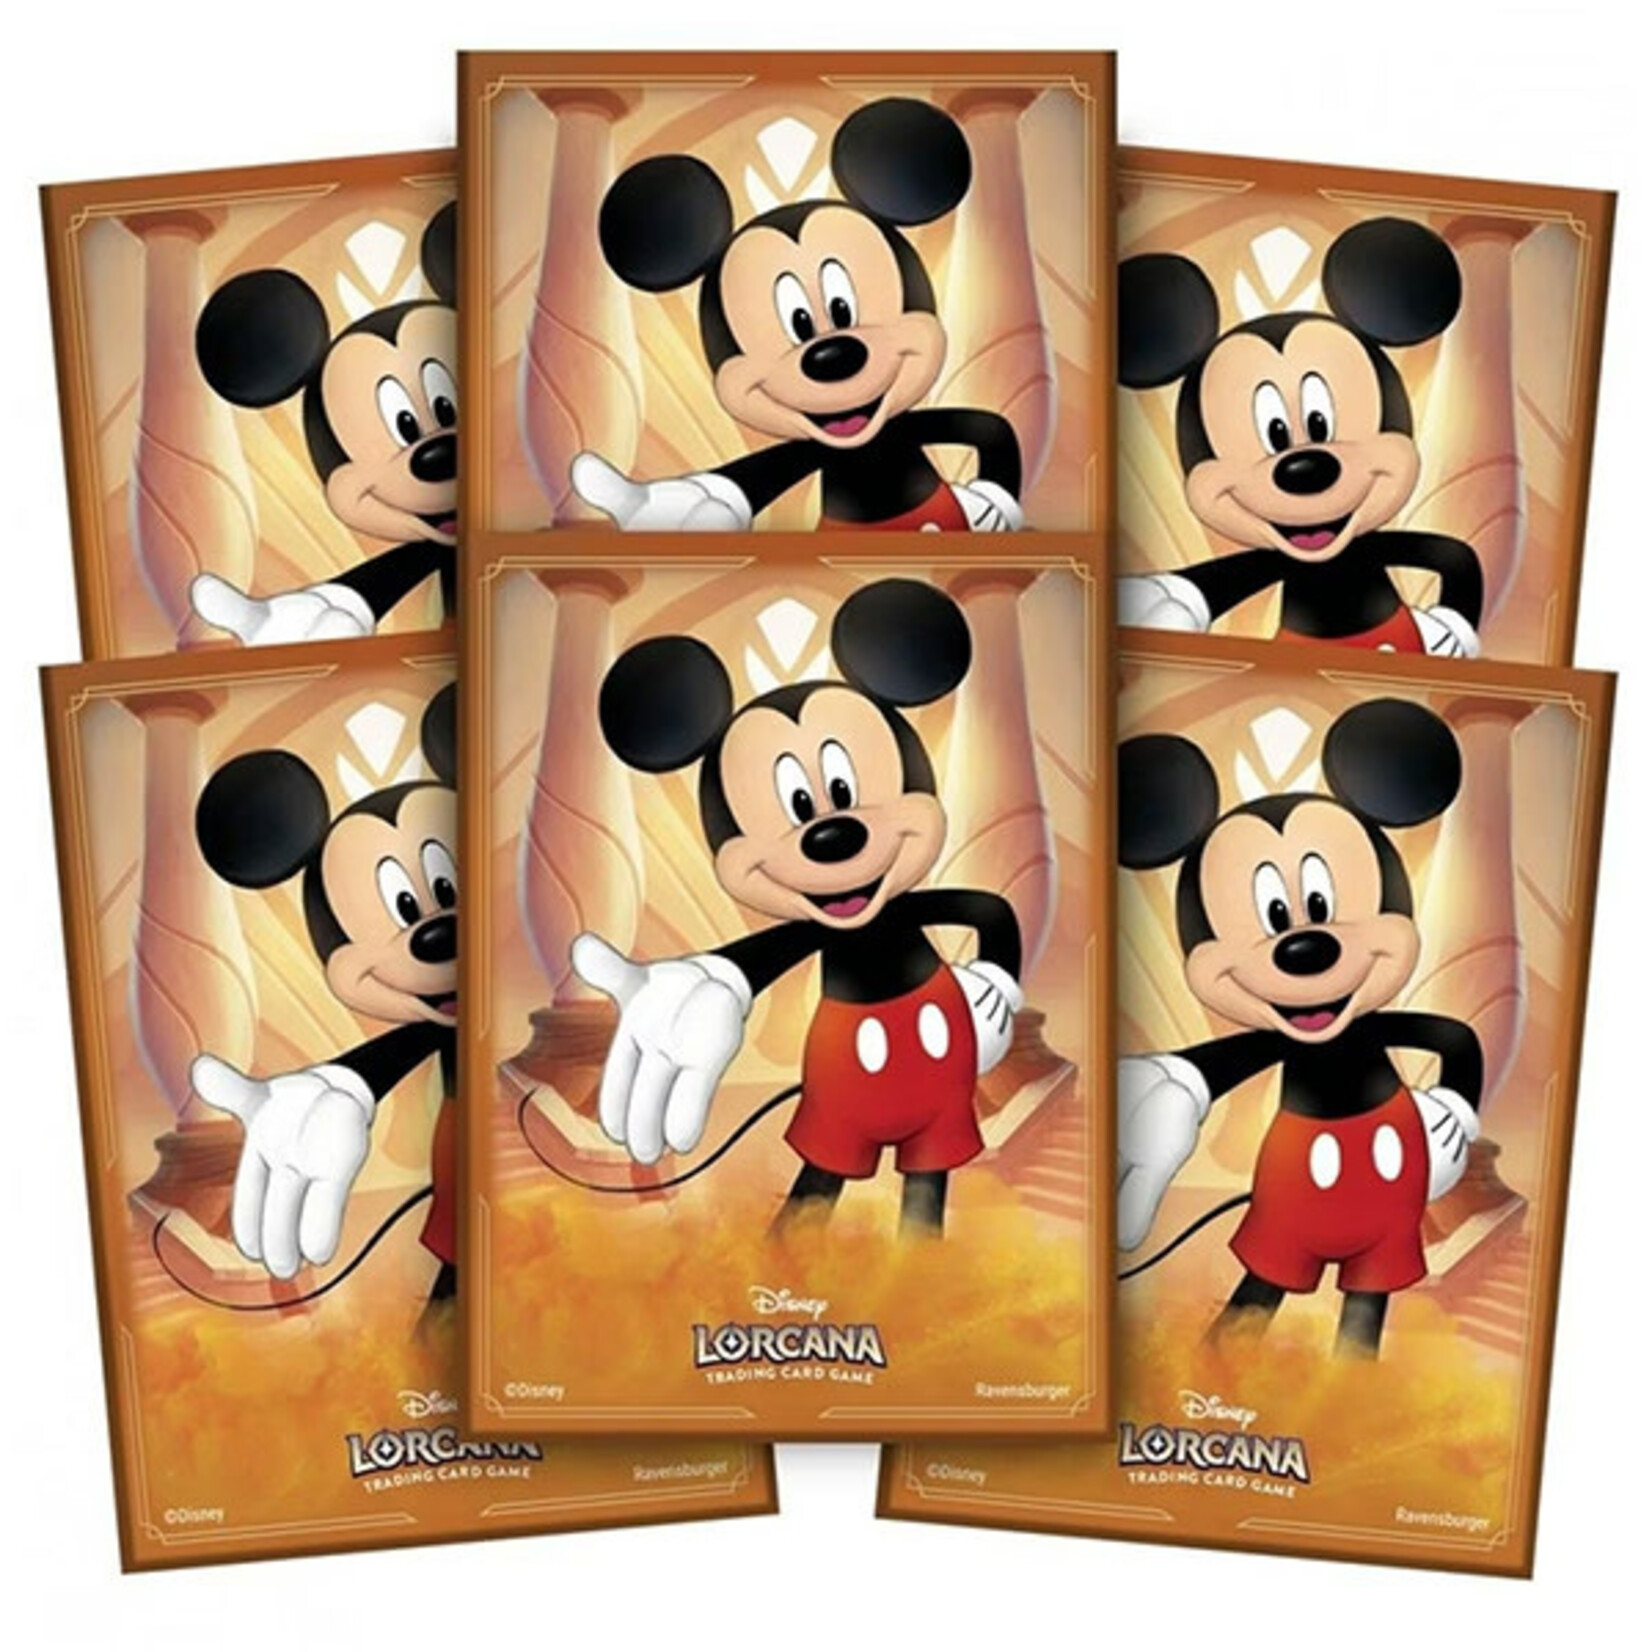 Ravensburger Card Sleeves: Disney Lorcana: The First Chapter – Mickey Mouse